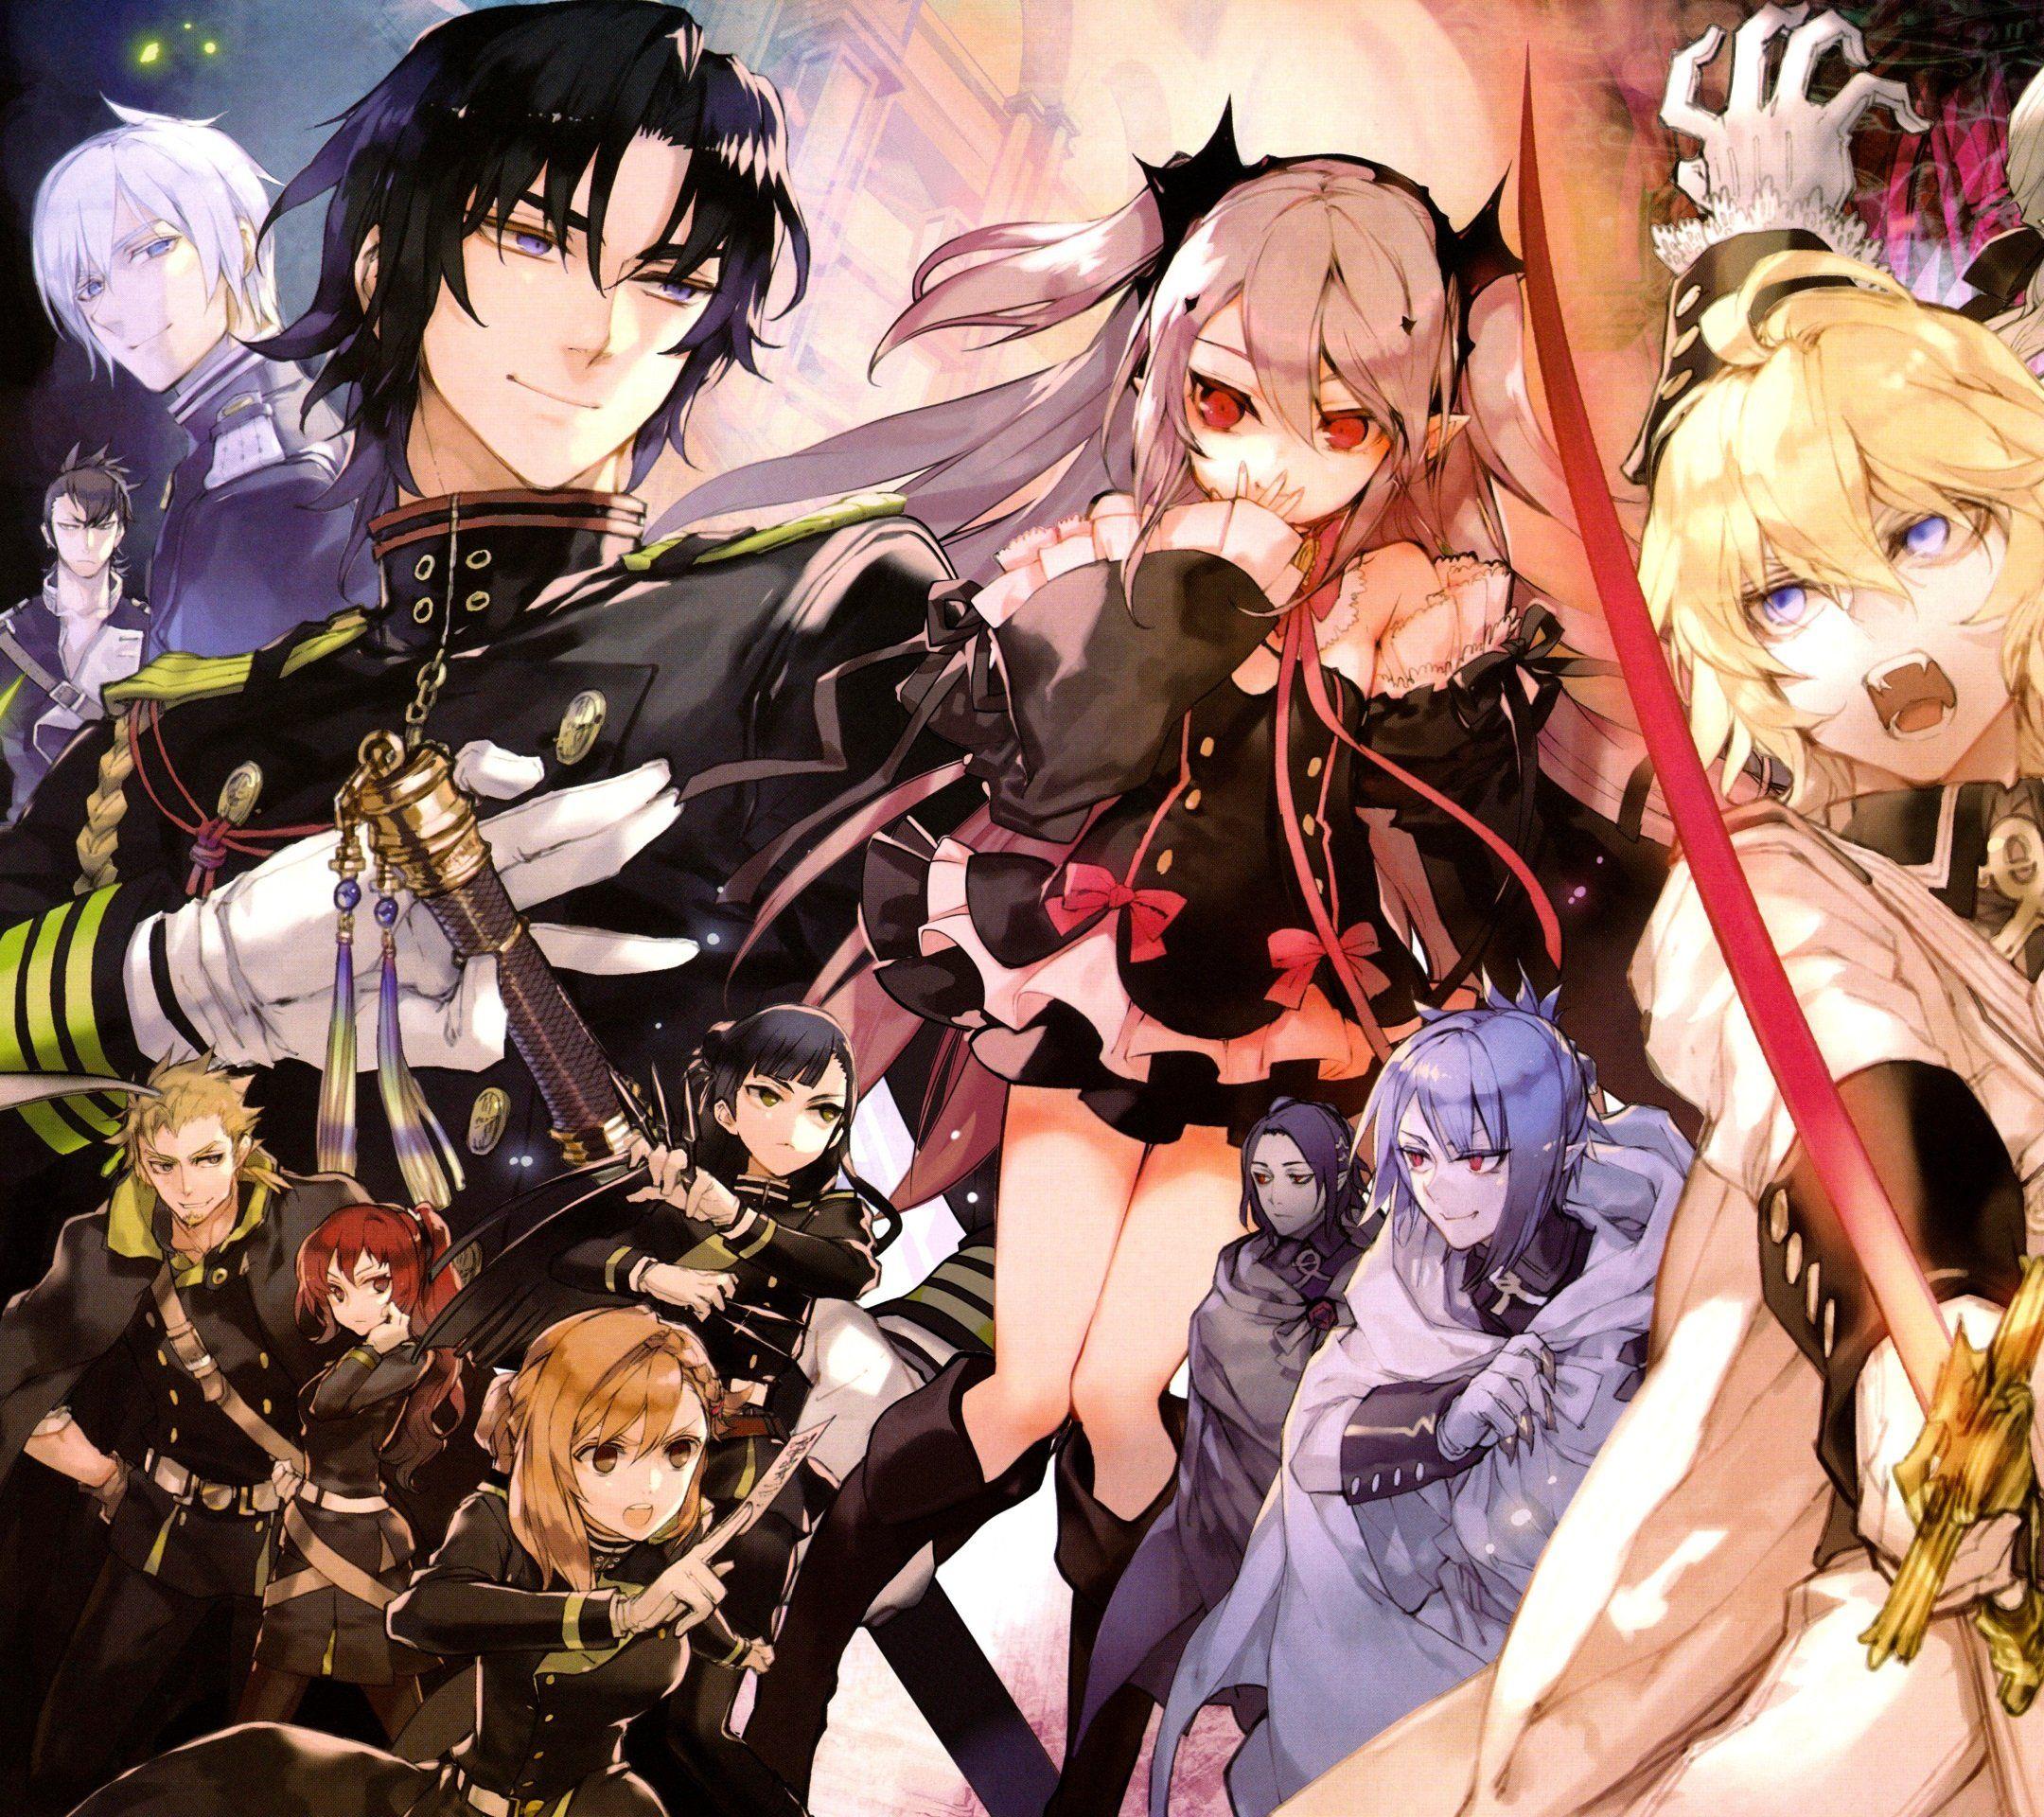 Owari no Seraph (Seraph of the End) anime wallpaper for iPhone